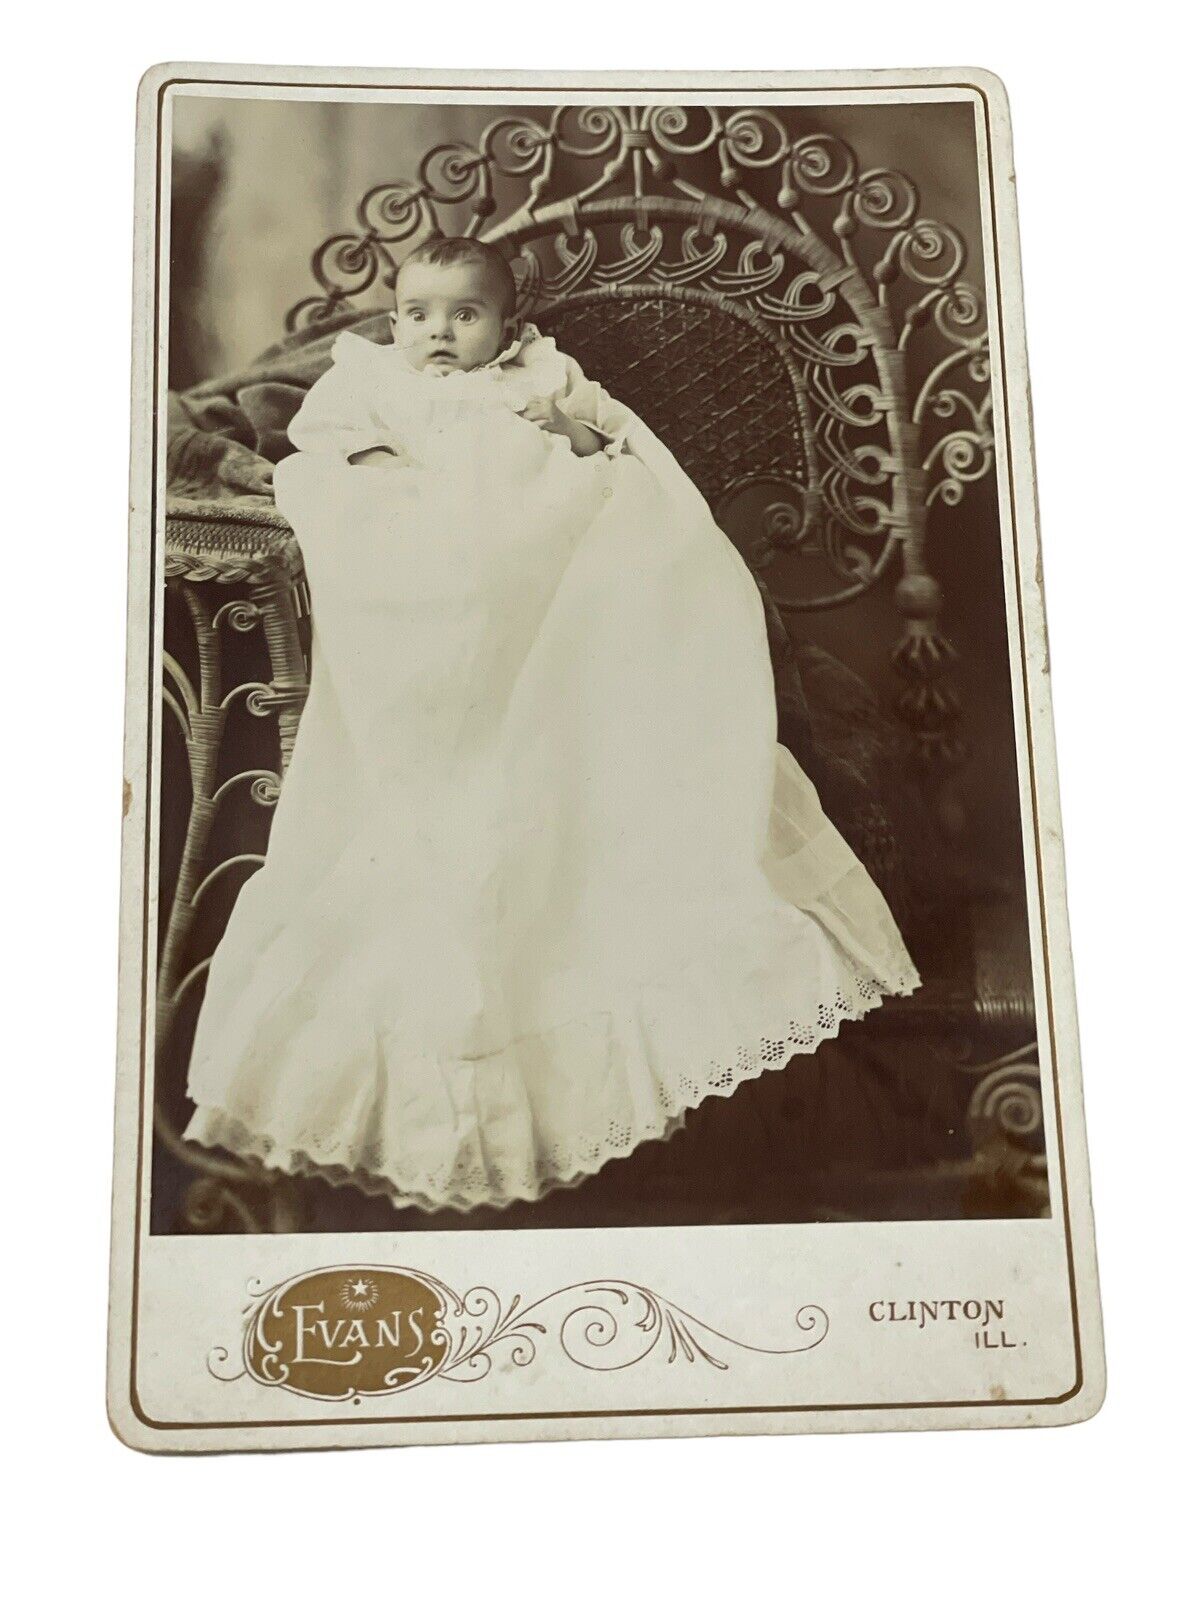 1800's Cabinet Card Portrait of a Baby in a Peacock Wicker Chair 4x6 Illinois